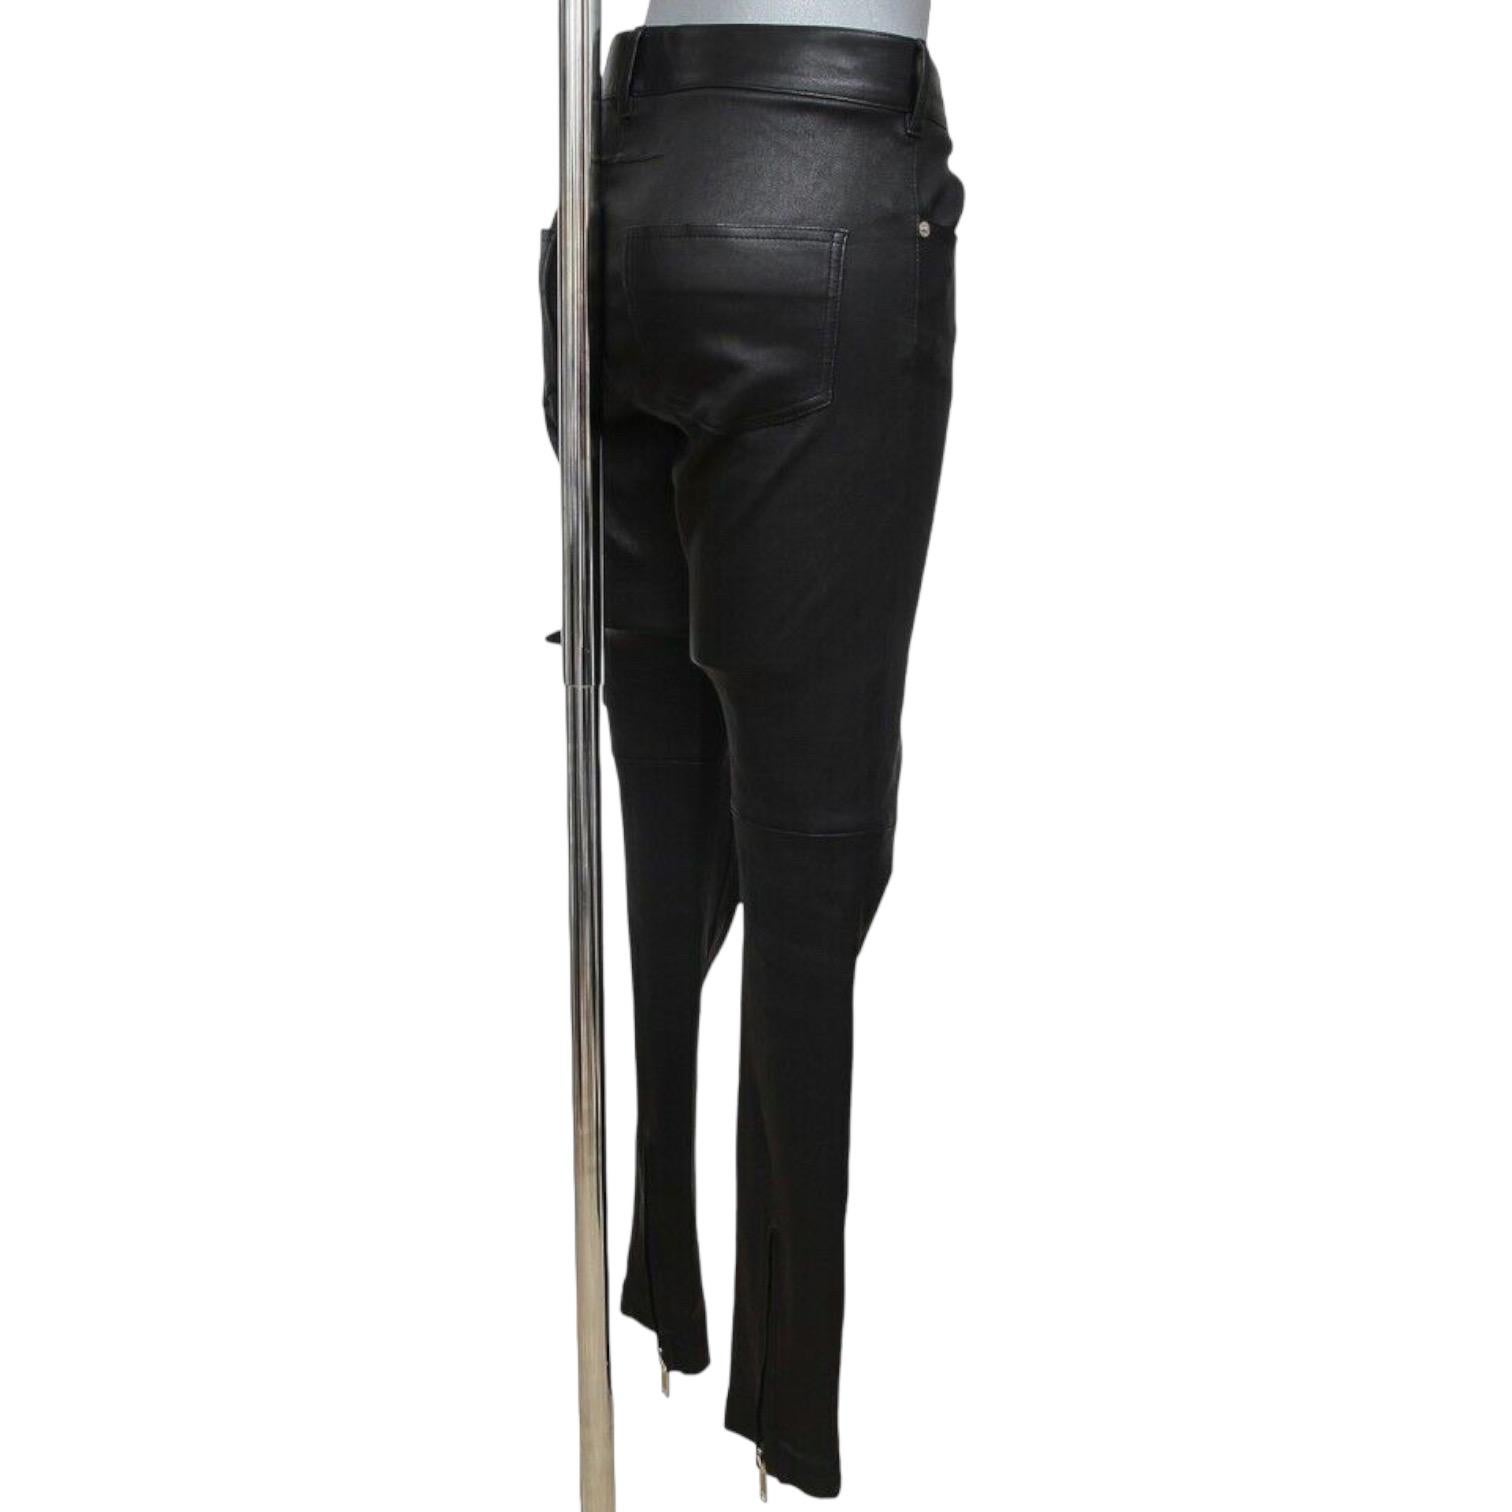 GUARANTEED AUTHENTIC GIVENCHY BLACK LEATHER SKINNY LEG PANTS

Retail excluding sales taxes $3,100

Details:
 - Buttery soft mid-rise black leather pants.
 - Front zipper and button closure.
 - Front pockets.
 - Belt loops.
 - Rear pockets.
 -